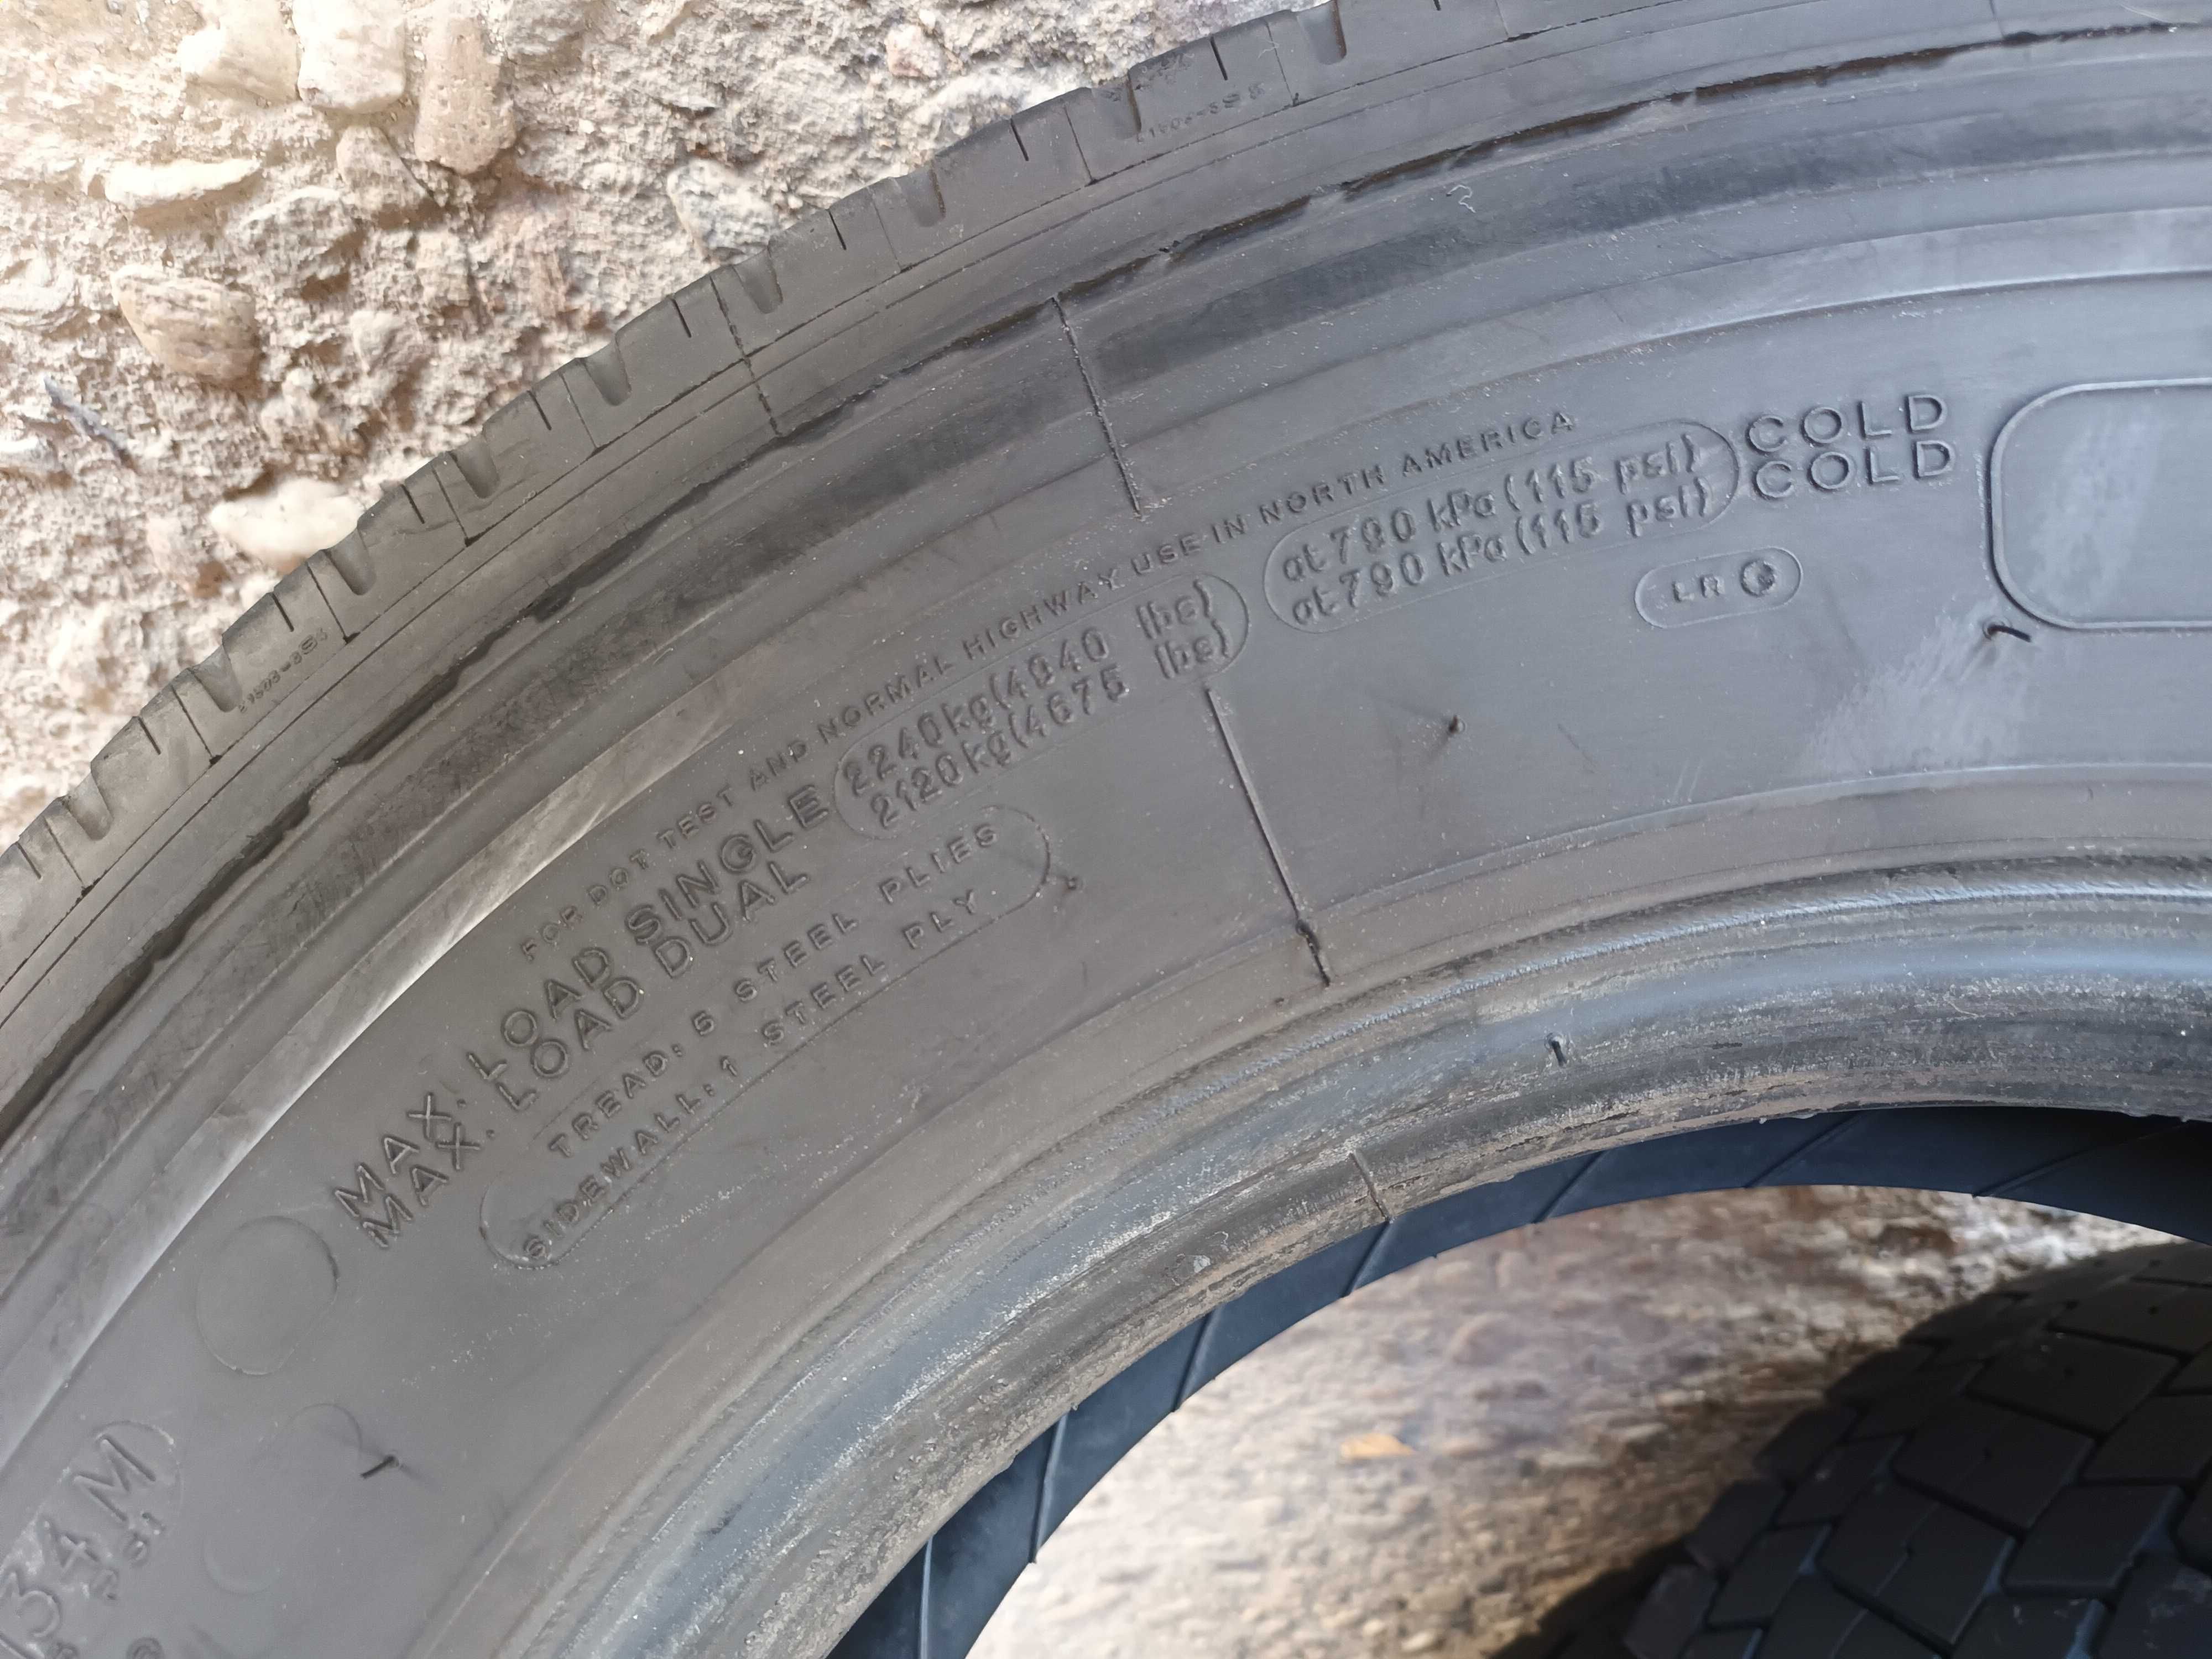 1 товарна гума 245/70 R17.5 Michelin XZE2 136/134M made in Germany